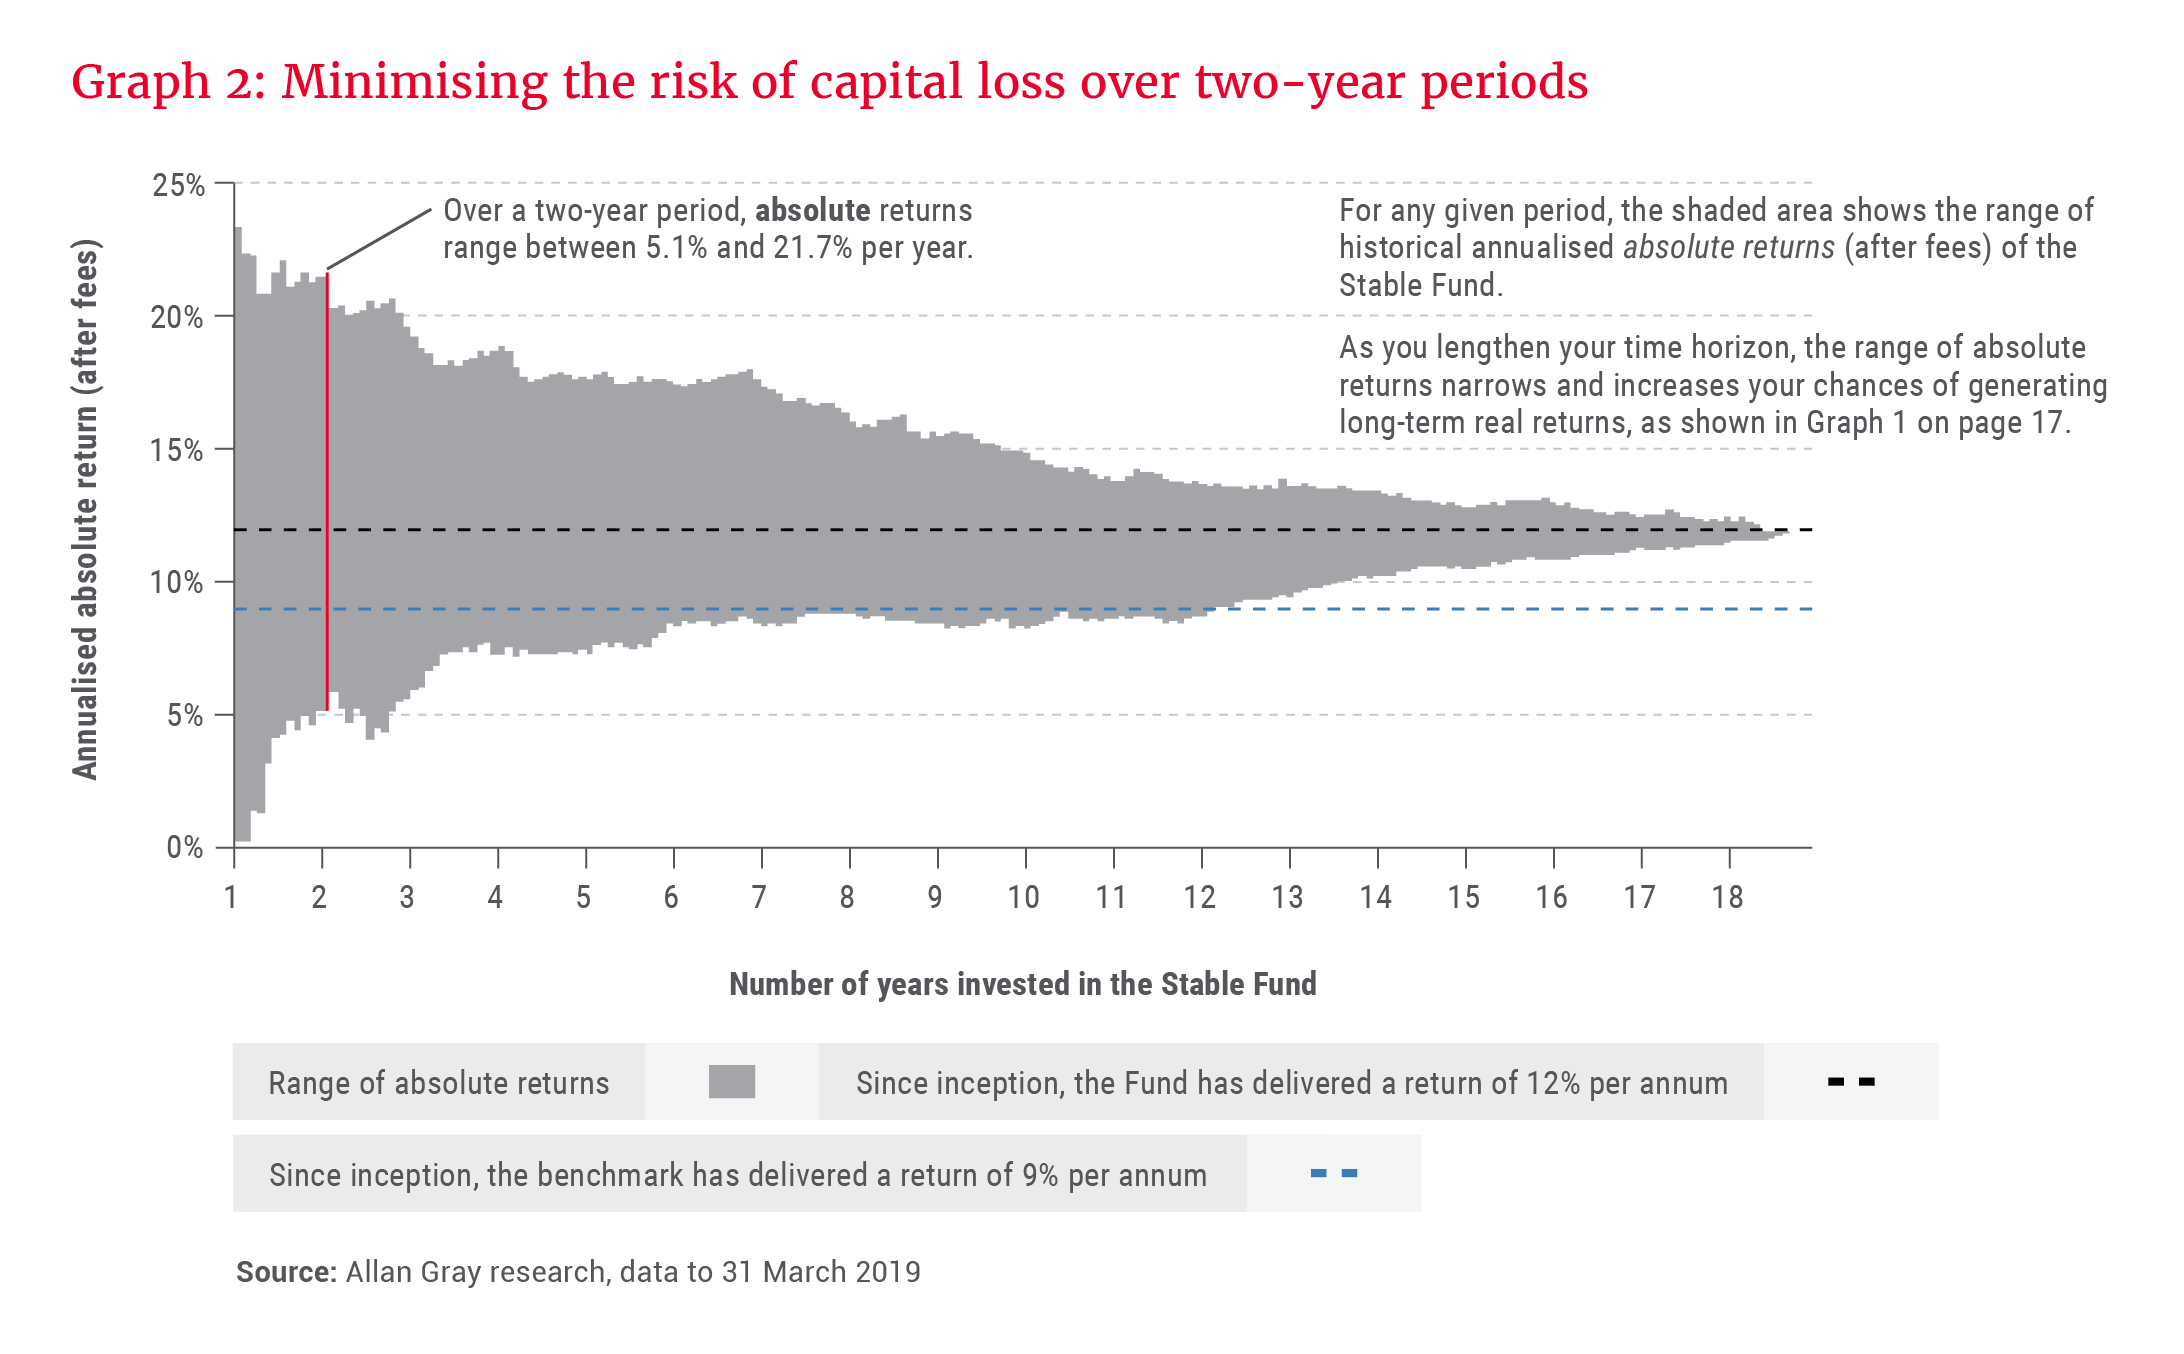 Minimising the risk of capital loss over two-year periods - The Allan Gray Stable Fund